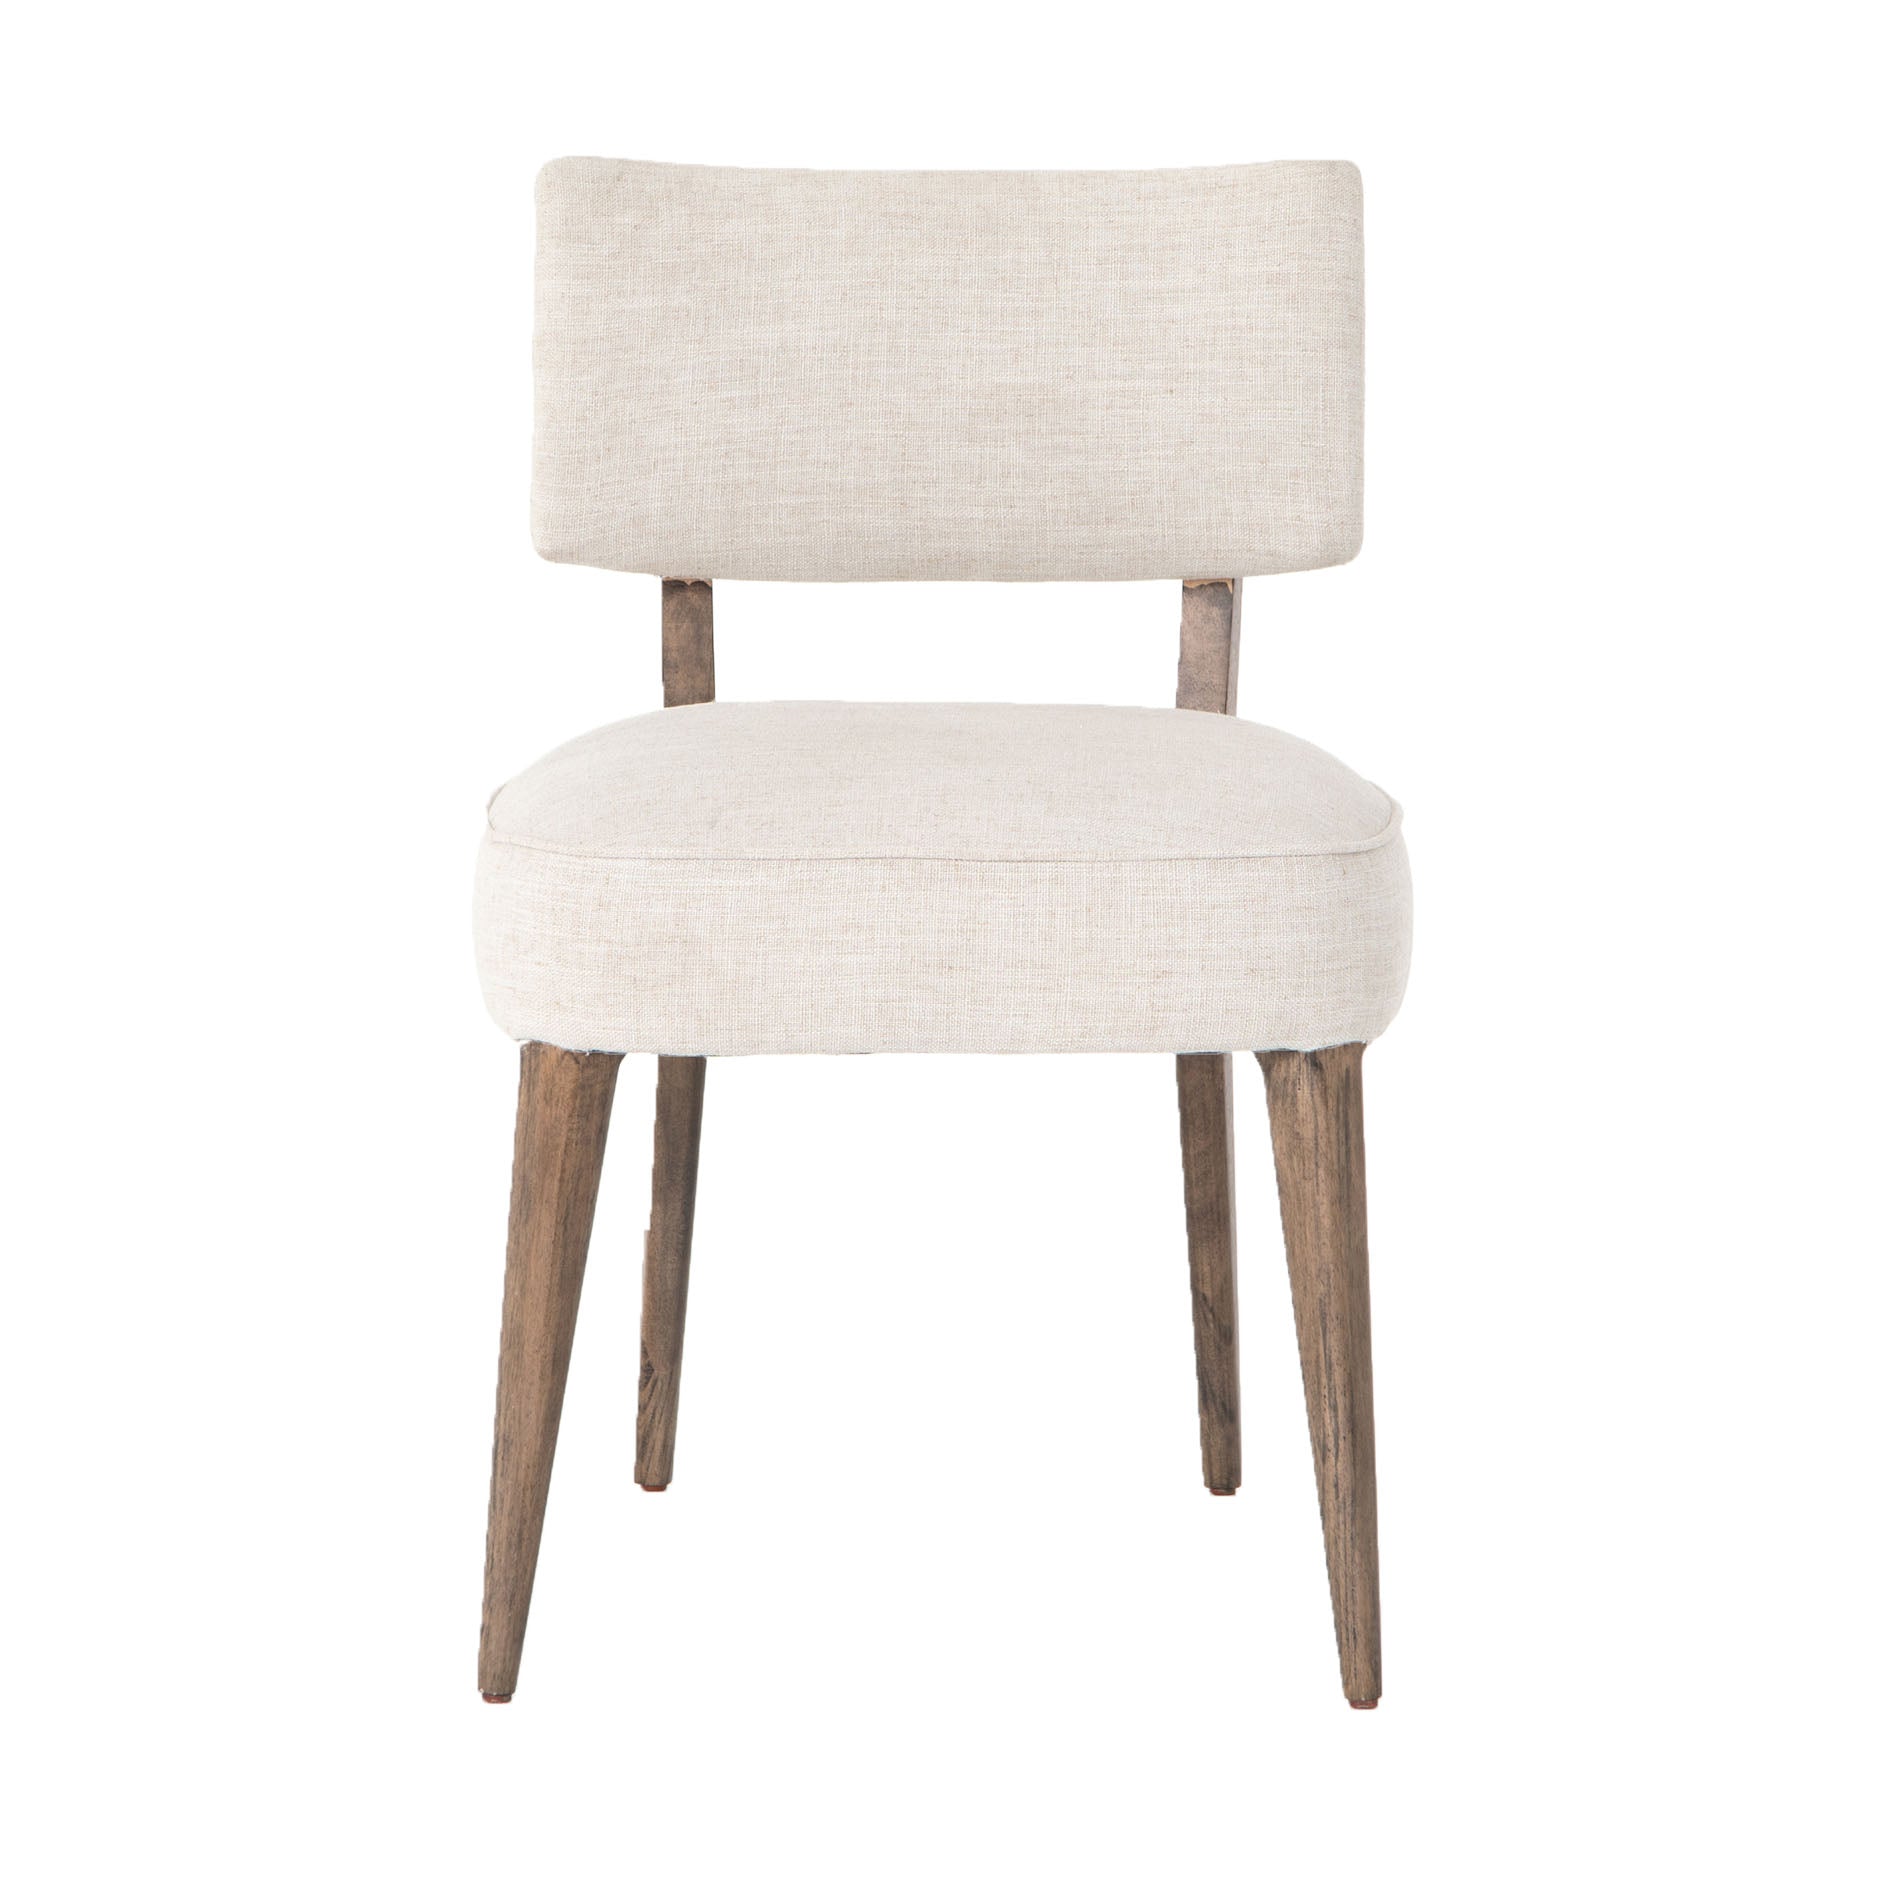 Orville Dining Chair - Cambric Ivory